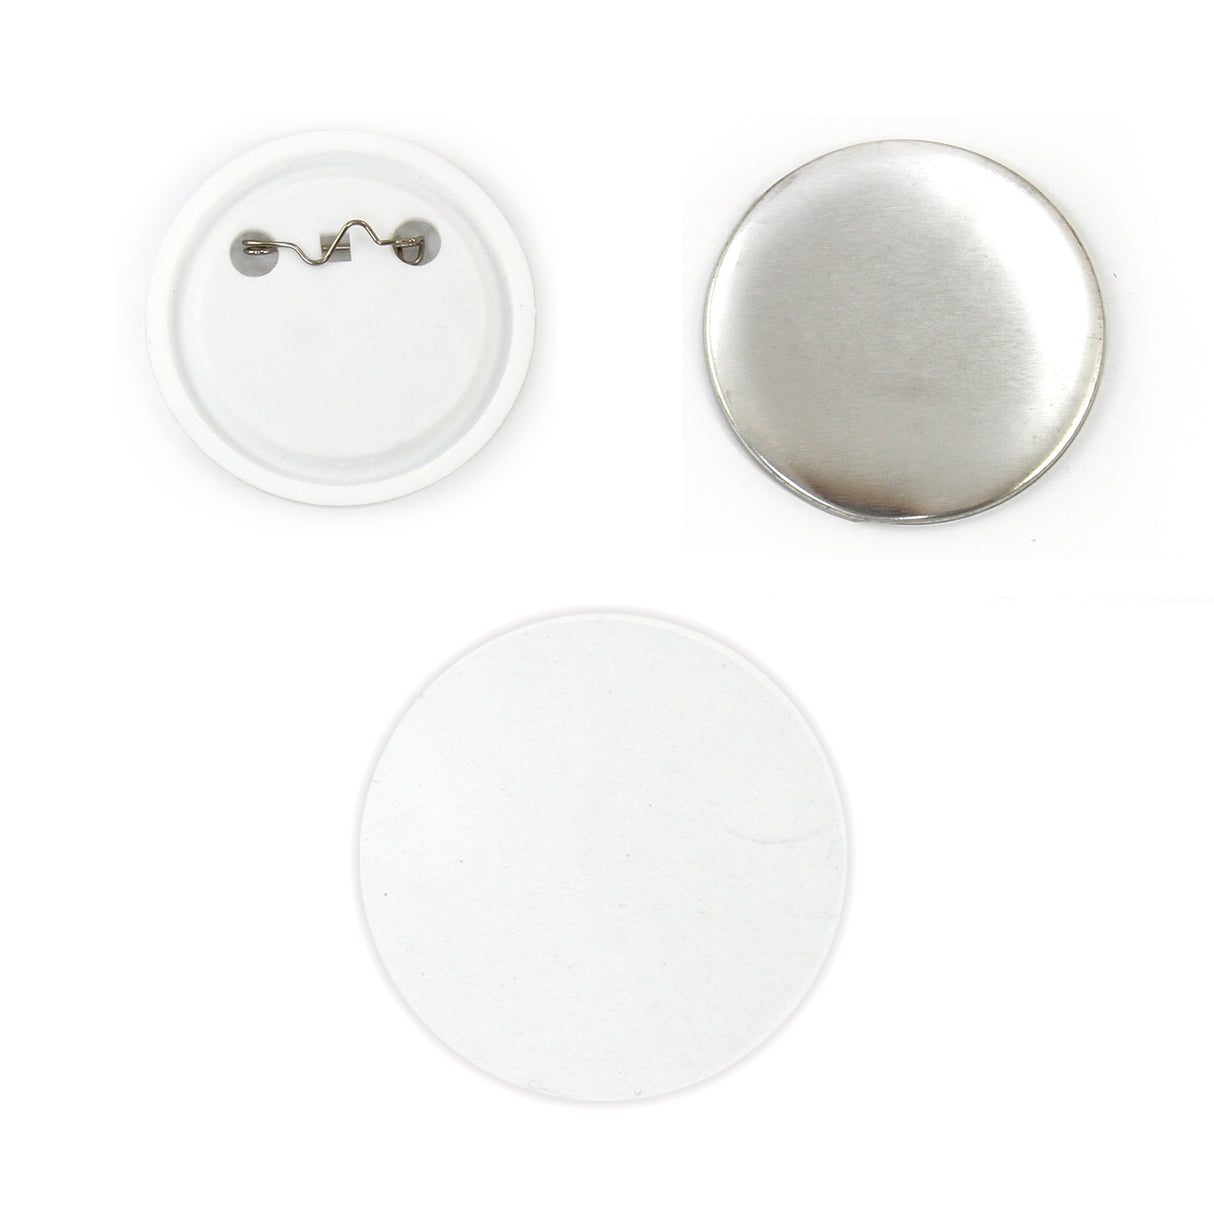 PixMax 25mm Badge Components for Pin Button Badge Pressing (100 Pack)